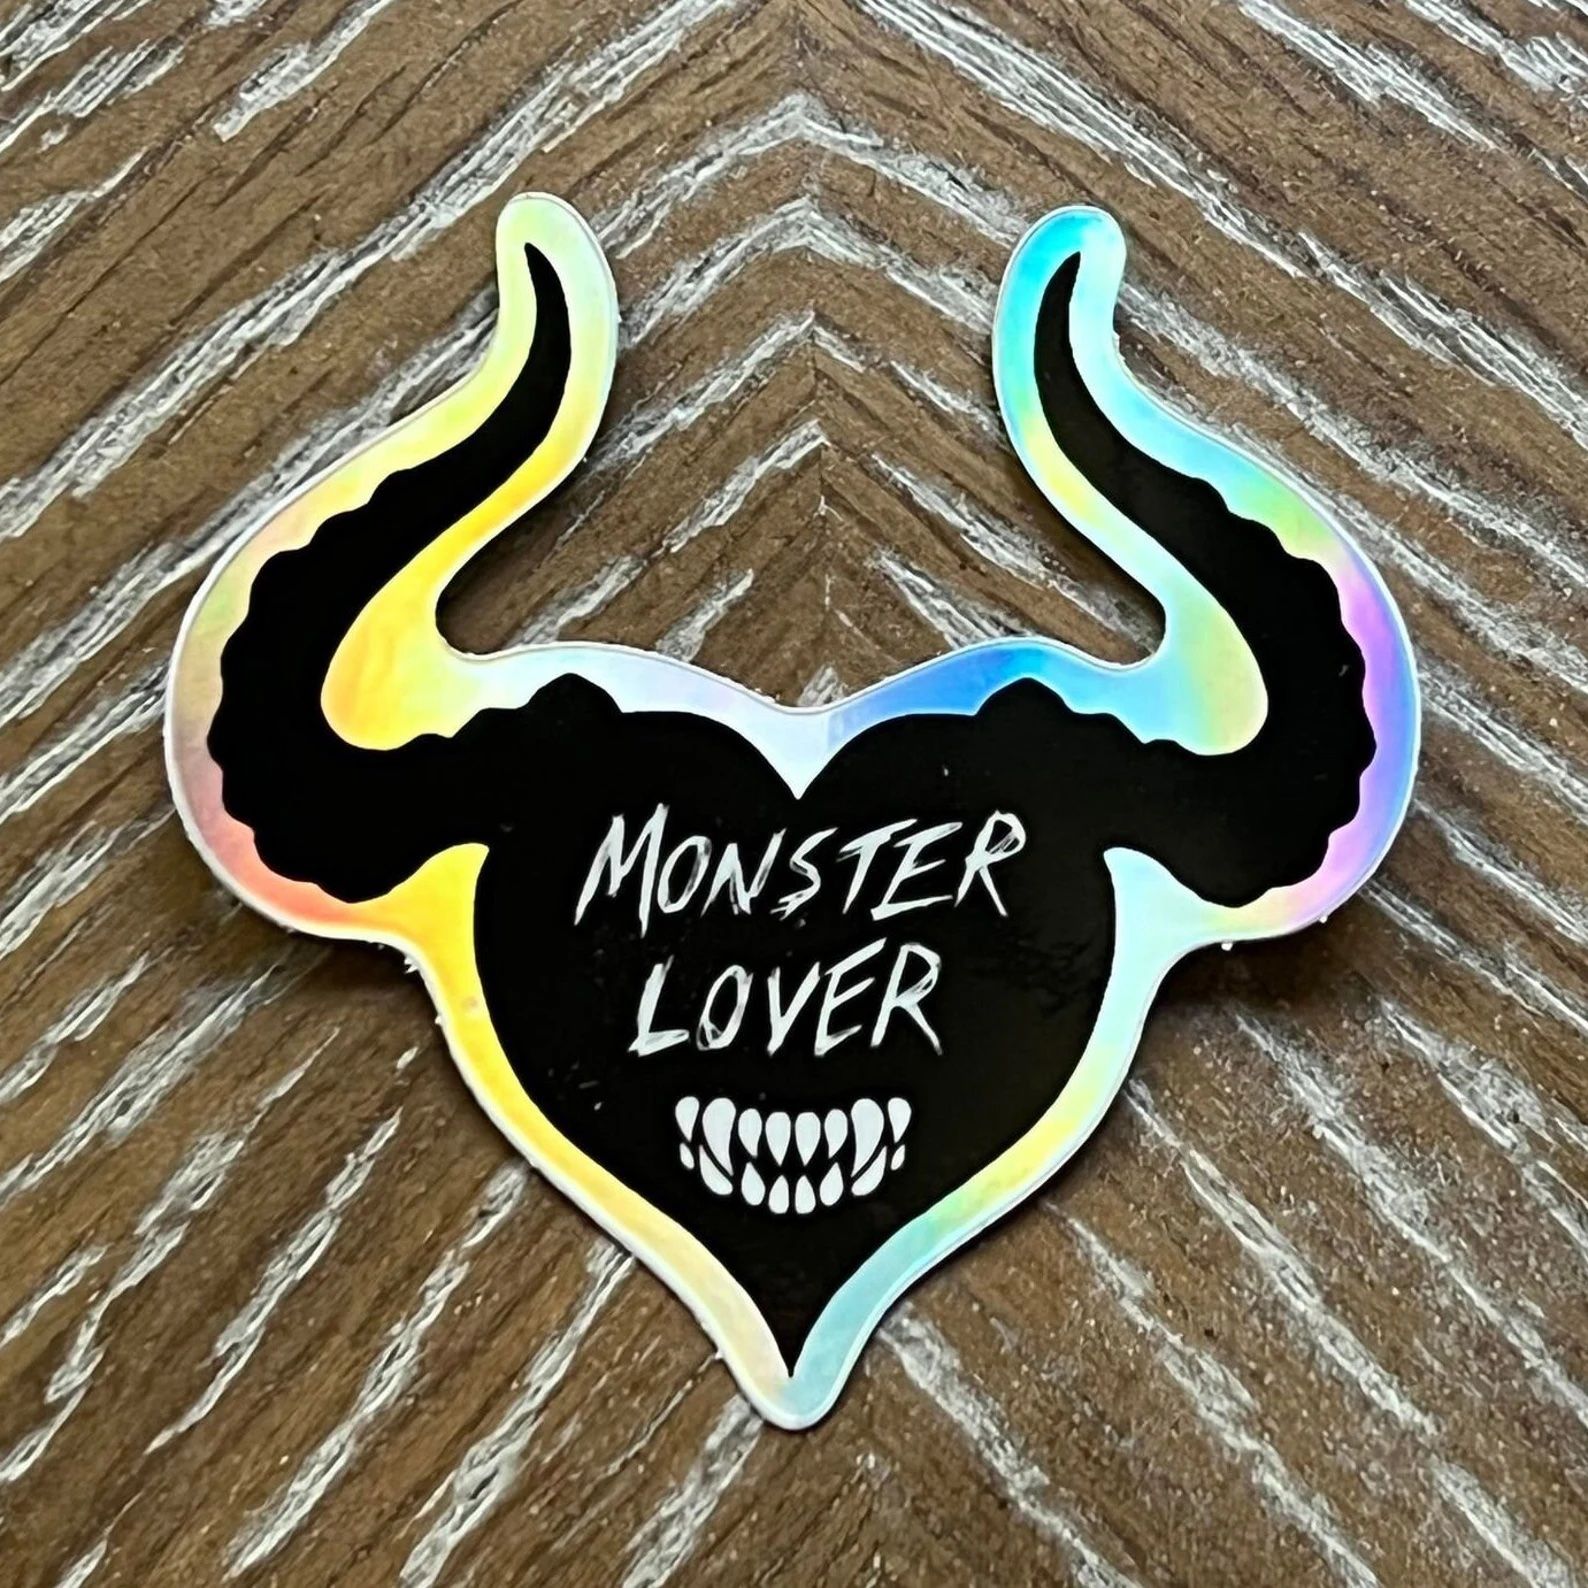 holographic sticker saying monster lover. Heart-shaped with horns and teeth.
